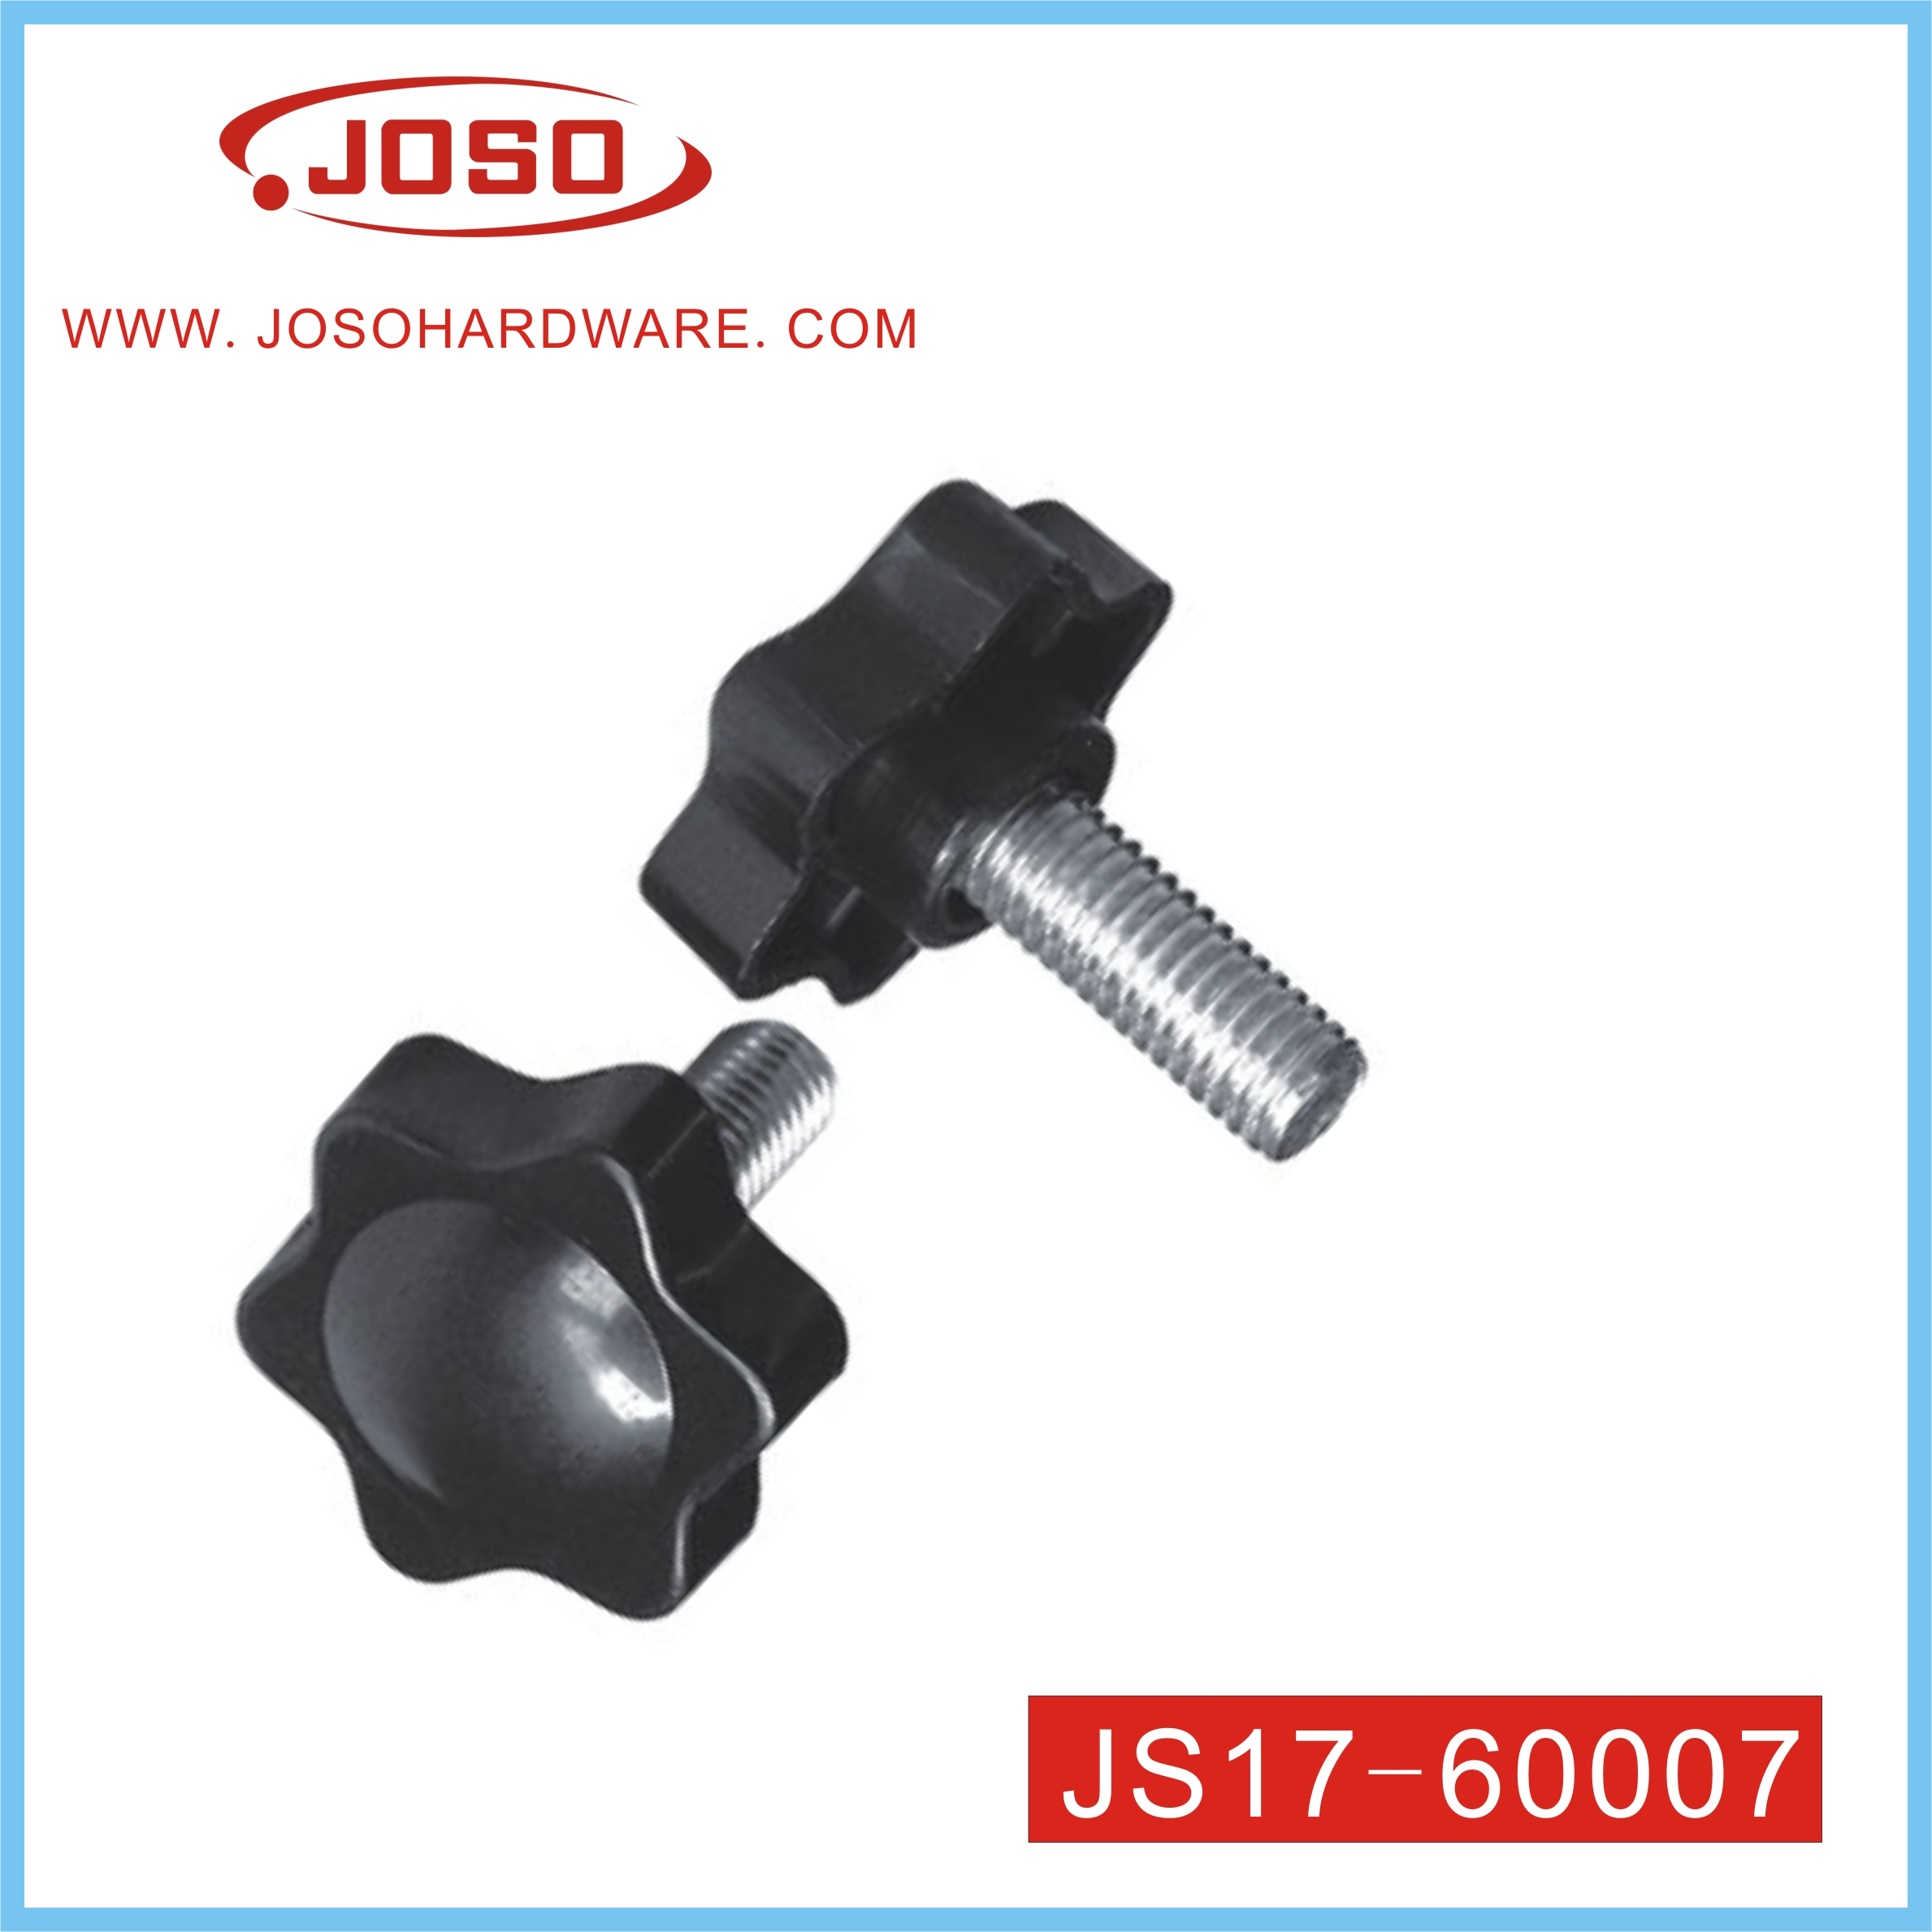 Hot Selling Adjustable Glide Screw of Furniture Accessories for Table Leg